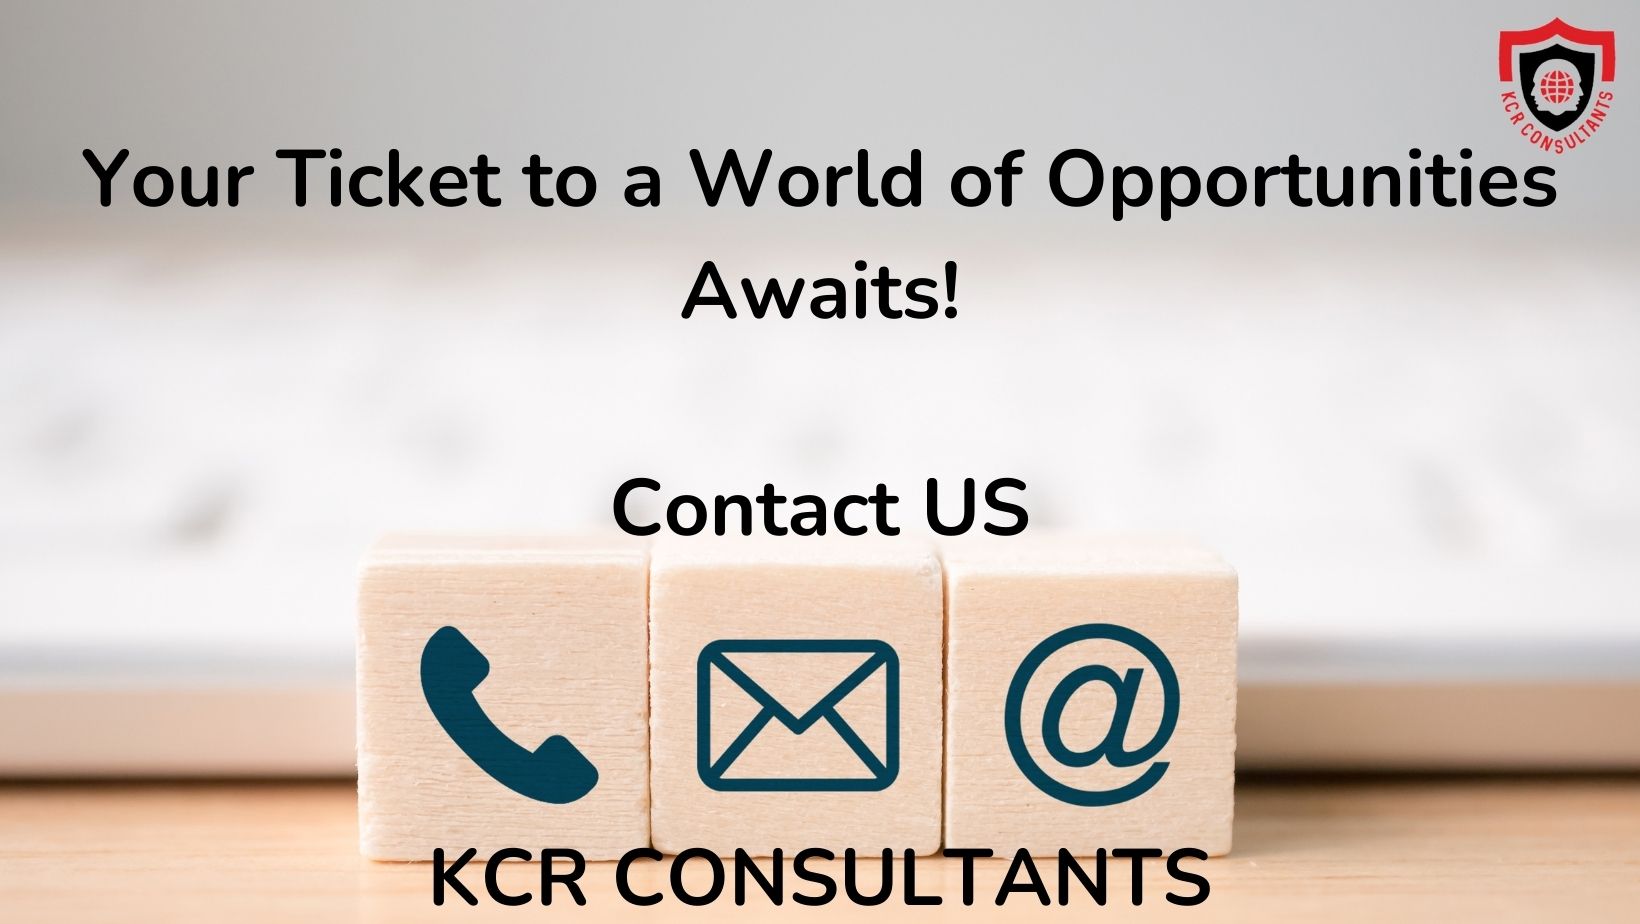 Opportunity Card Germany - KCR CONSULTANTS - Contact us